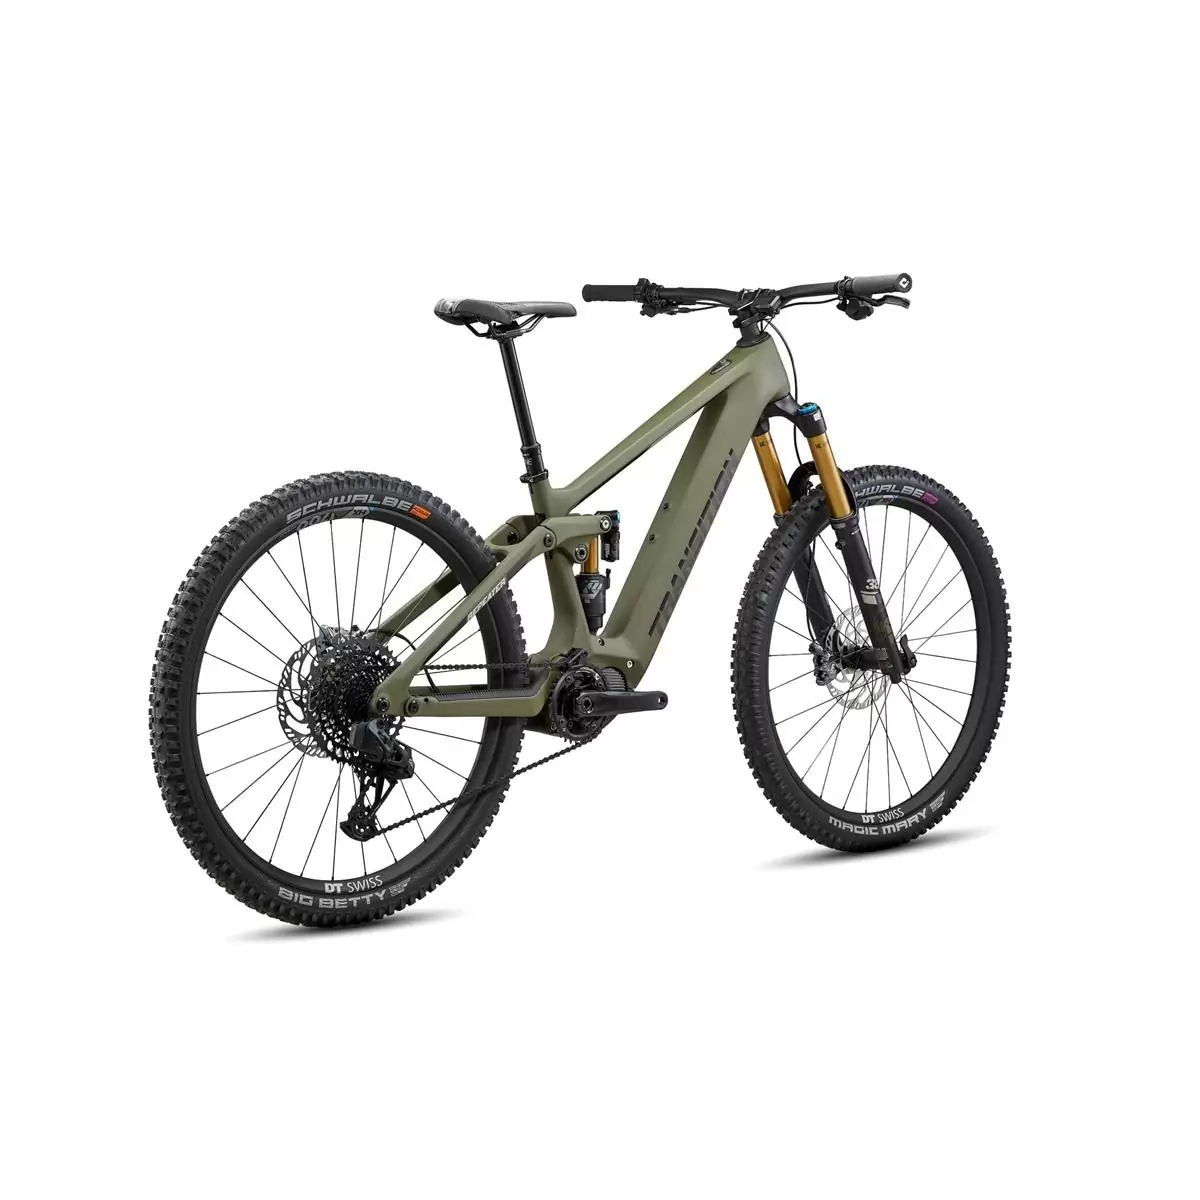 Repeater Carbon AXS 29'' 160mm 12v 630Wh Shimano EP8 Mossy Green Taglia L #2